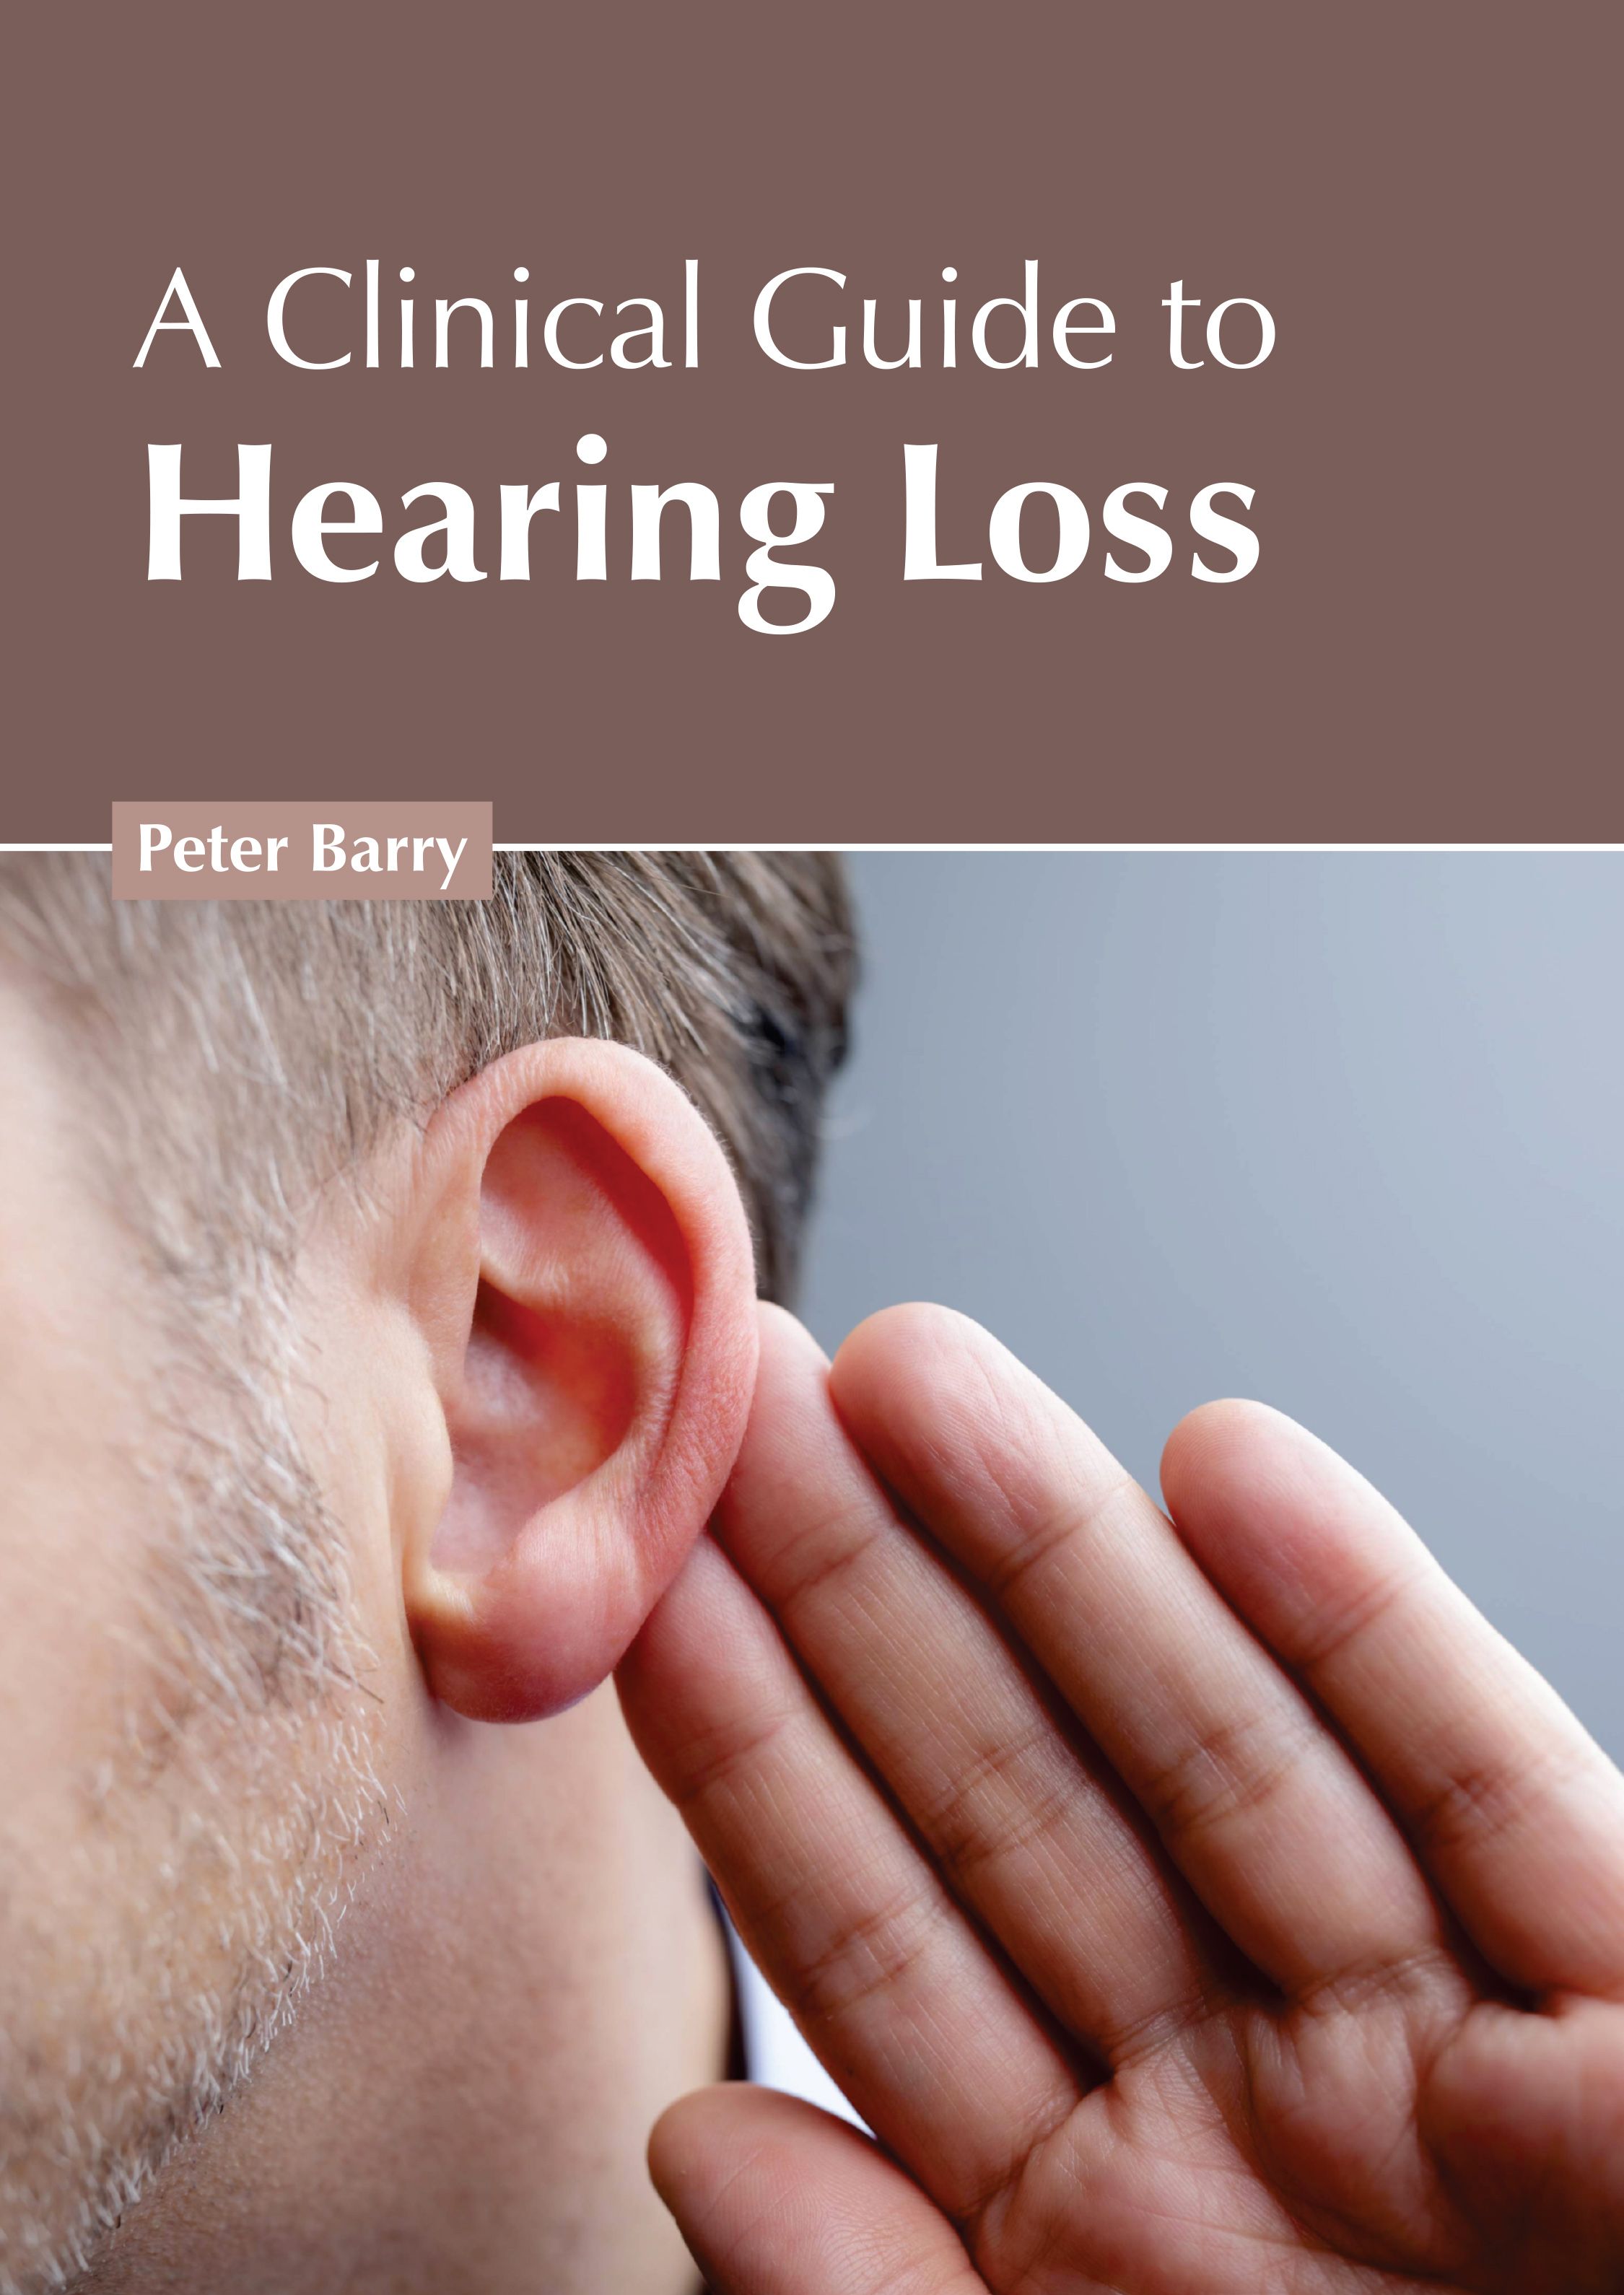 

exclusive-publishers/american-medical-publishers/a-clinical-guide-to-hearing-loss-9798887401713